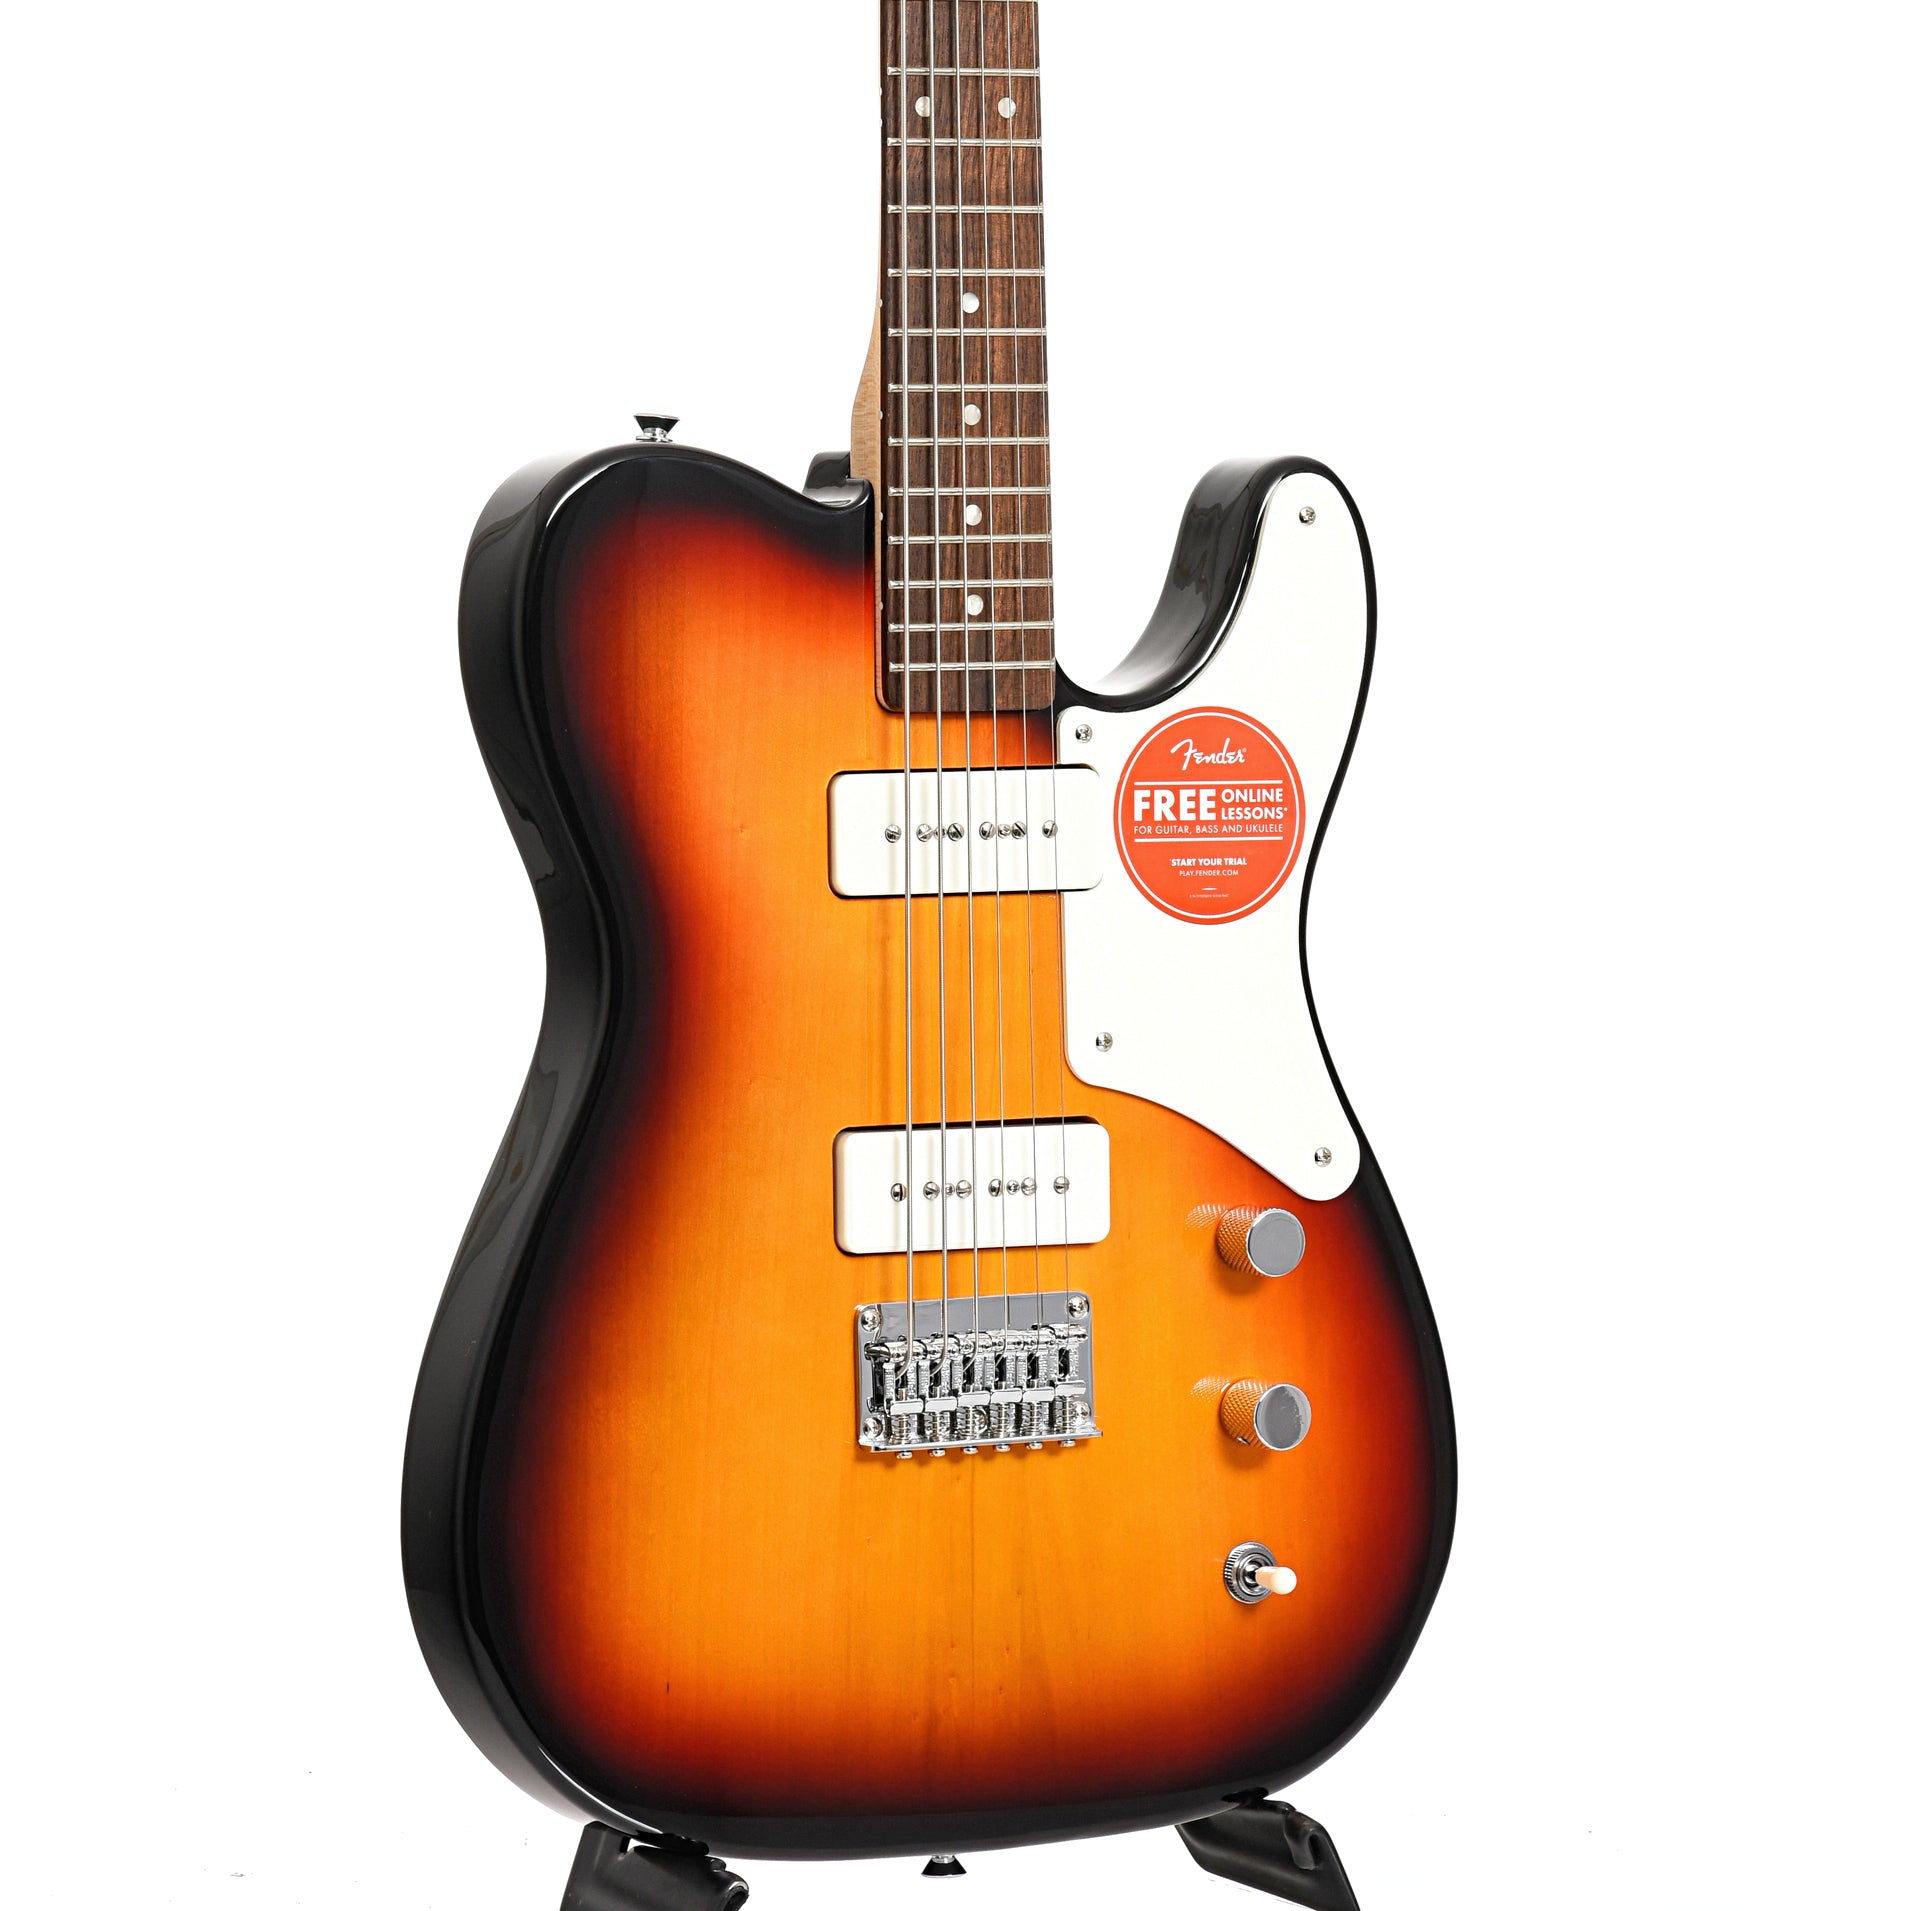 Image 3 of Squier Paranormal Baritone Cabronita Telecaster, 3-Color Sunburst - SKU# SPBARICT-3TS : Product Type Other : Elderly Instruments